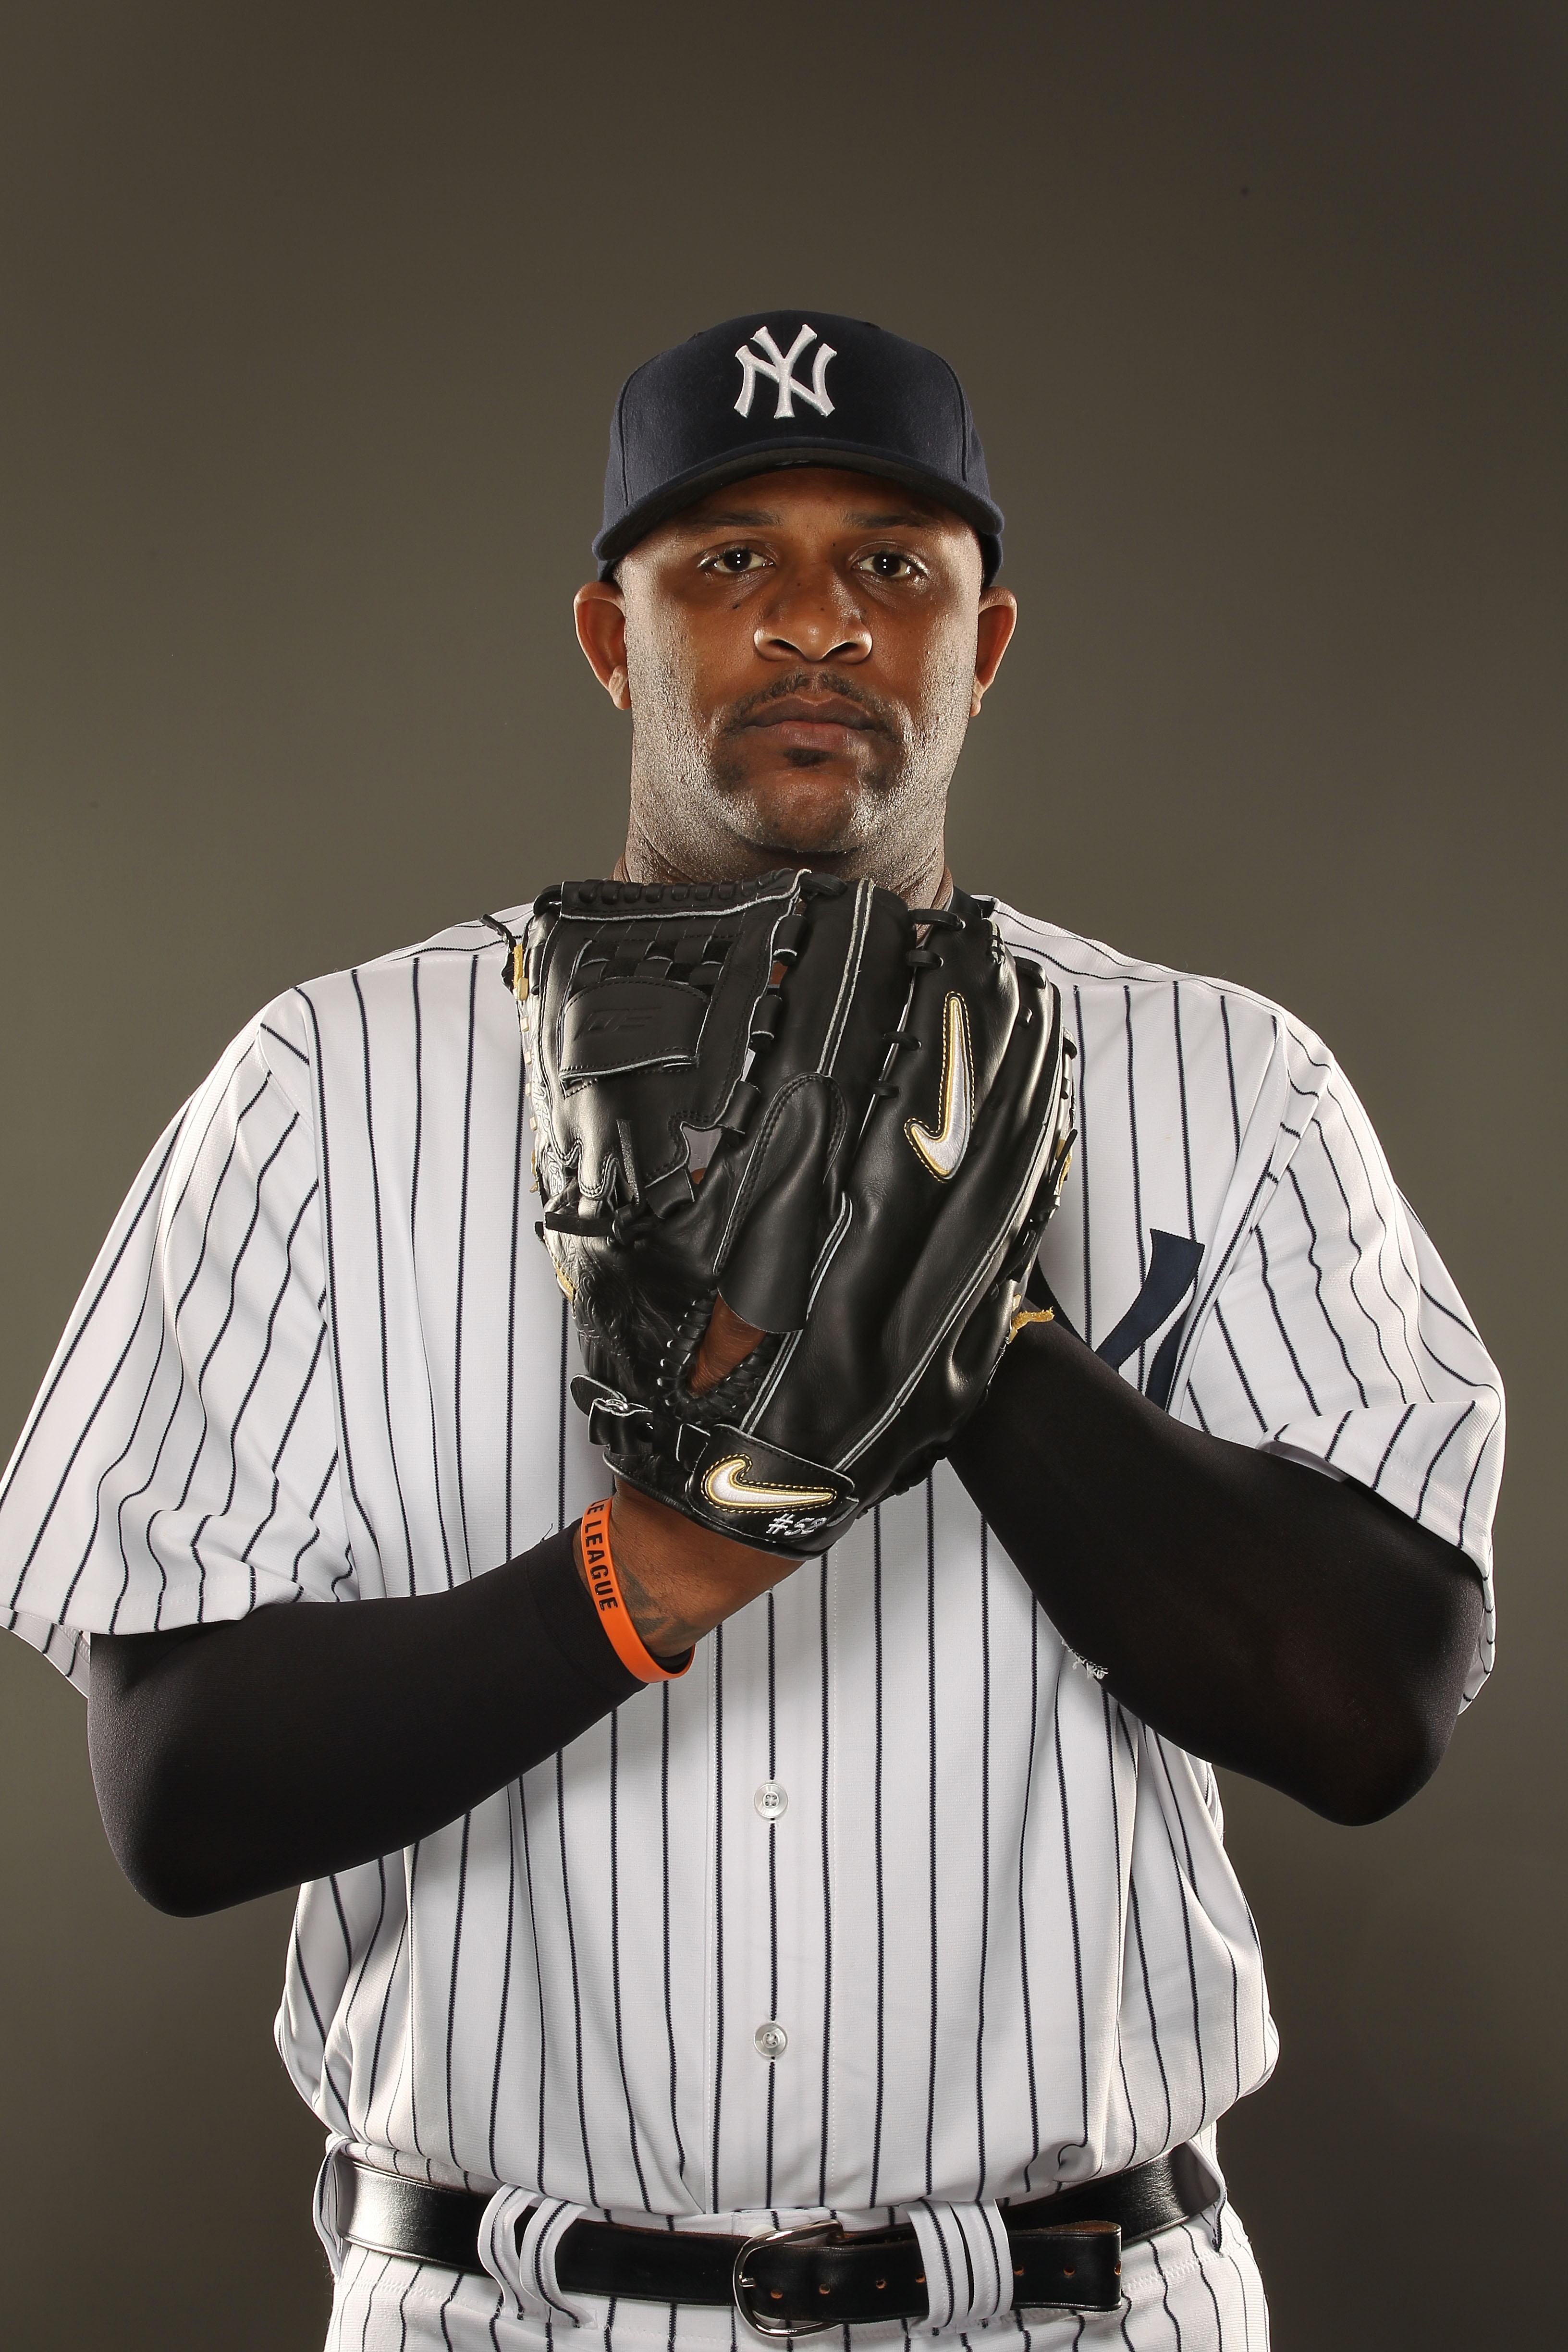 TAMPA, FL - FEBRUARY 23:  CC Sabathia #52 of the New York Yankees poses for a portrait on Photo Day at George M. Steinbrenner Field on February 23, 2011 in Tampa, Florida.  (Photo by Al Bello/Getty Images)